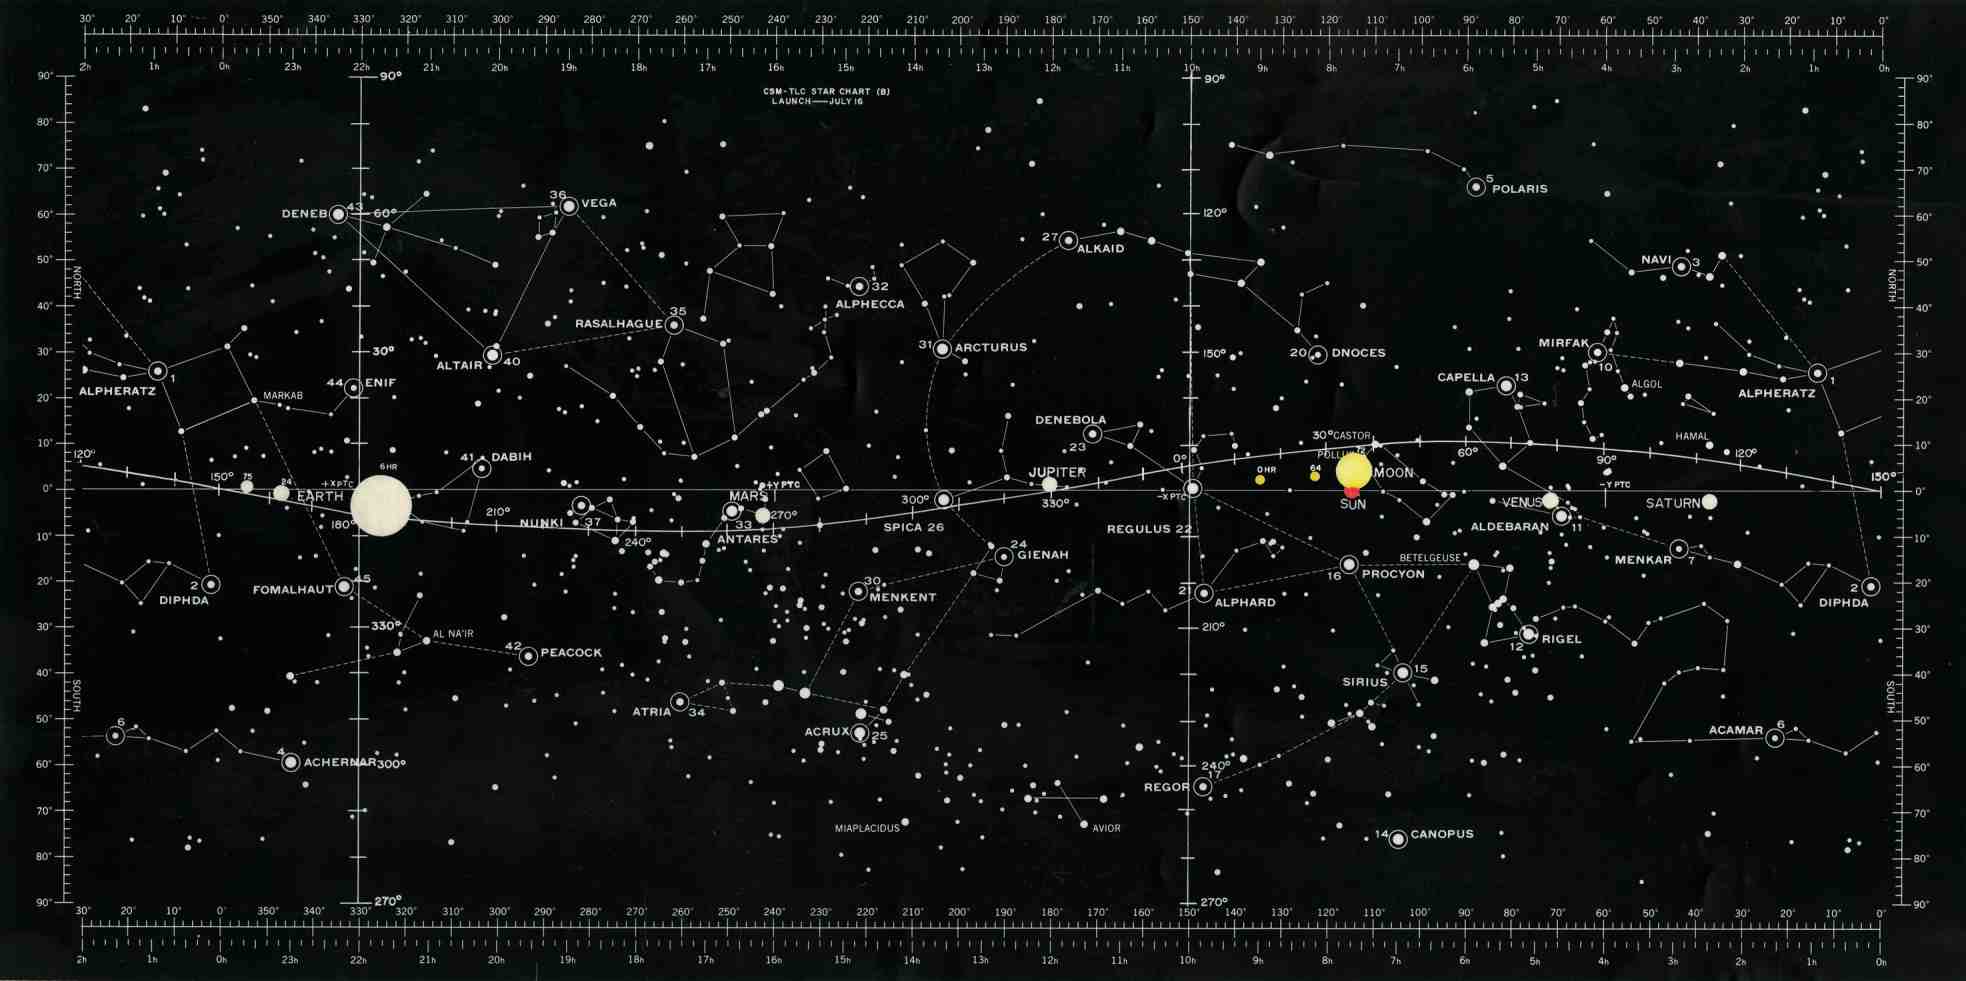 A starchart used during the Apollo 11 mission plans at NASA. Image: NASA